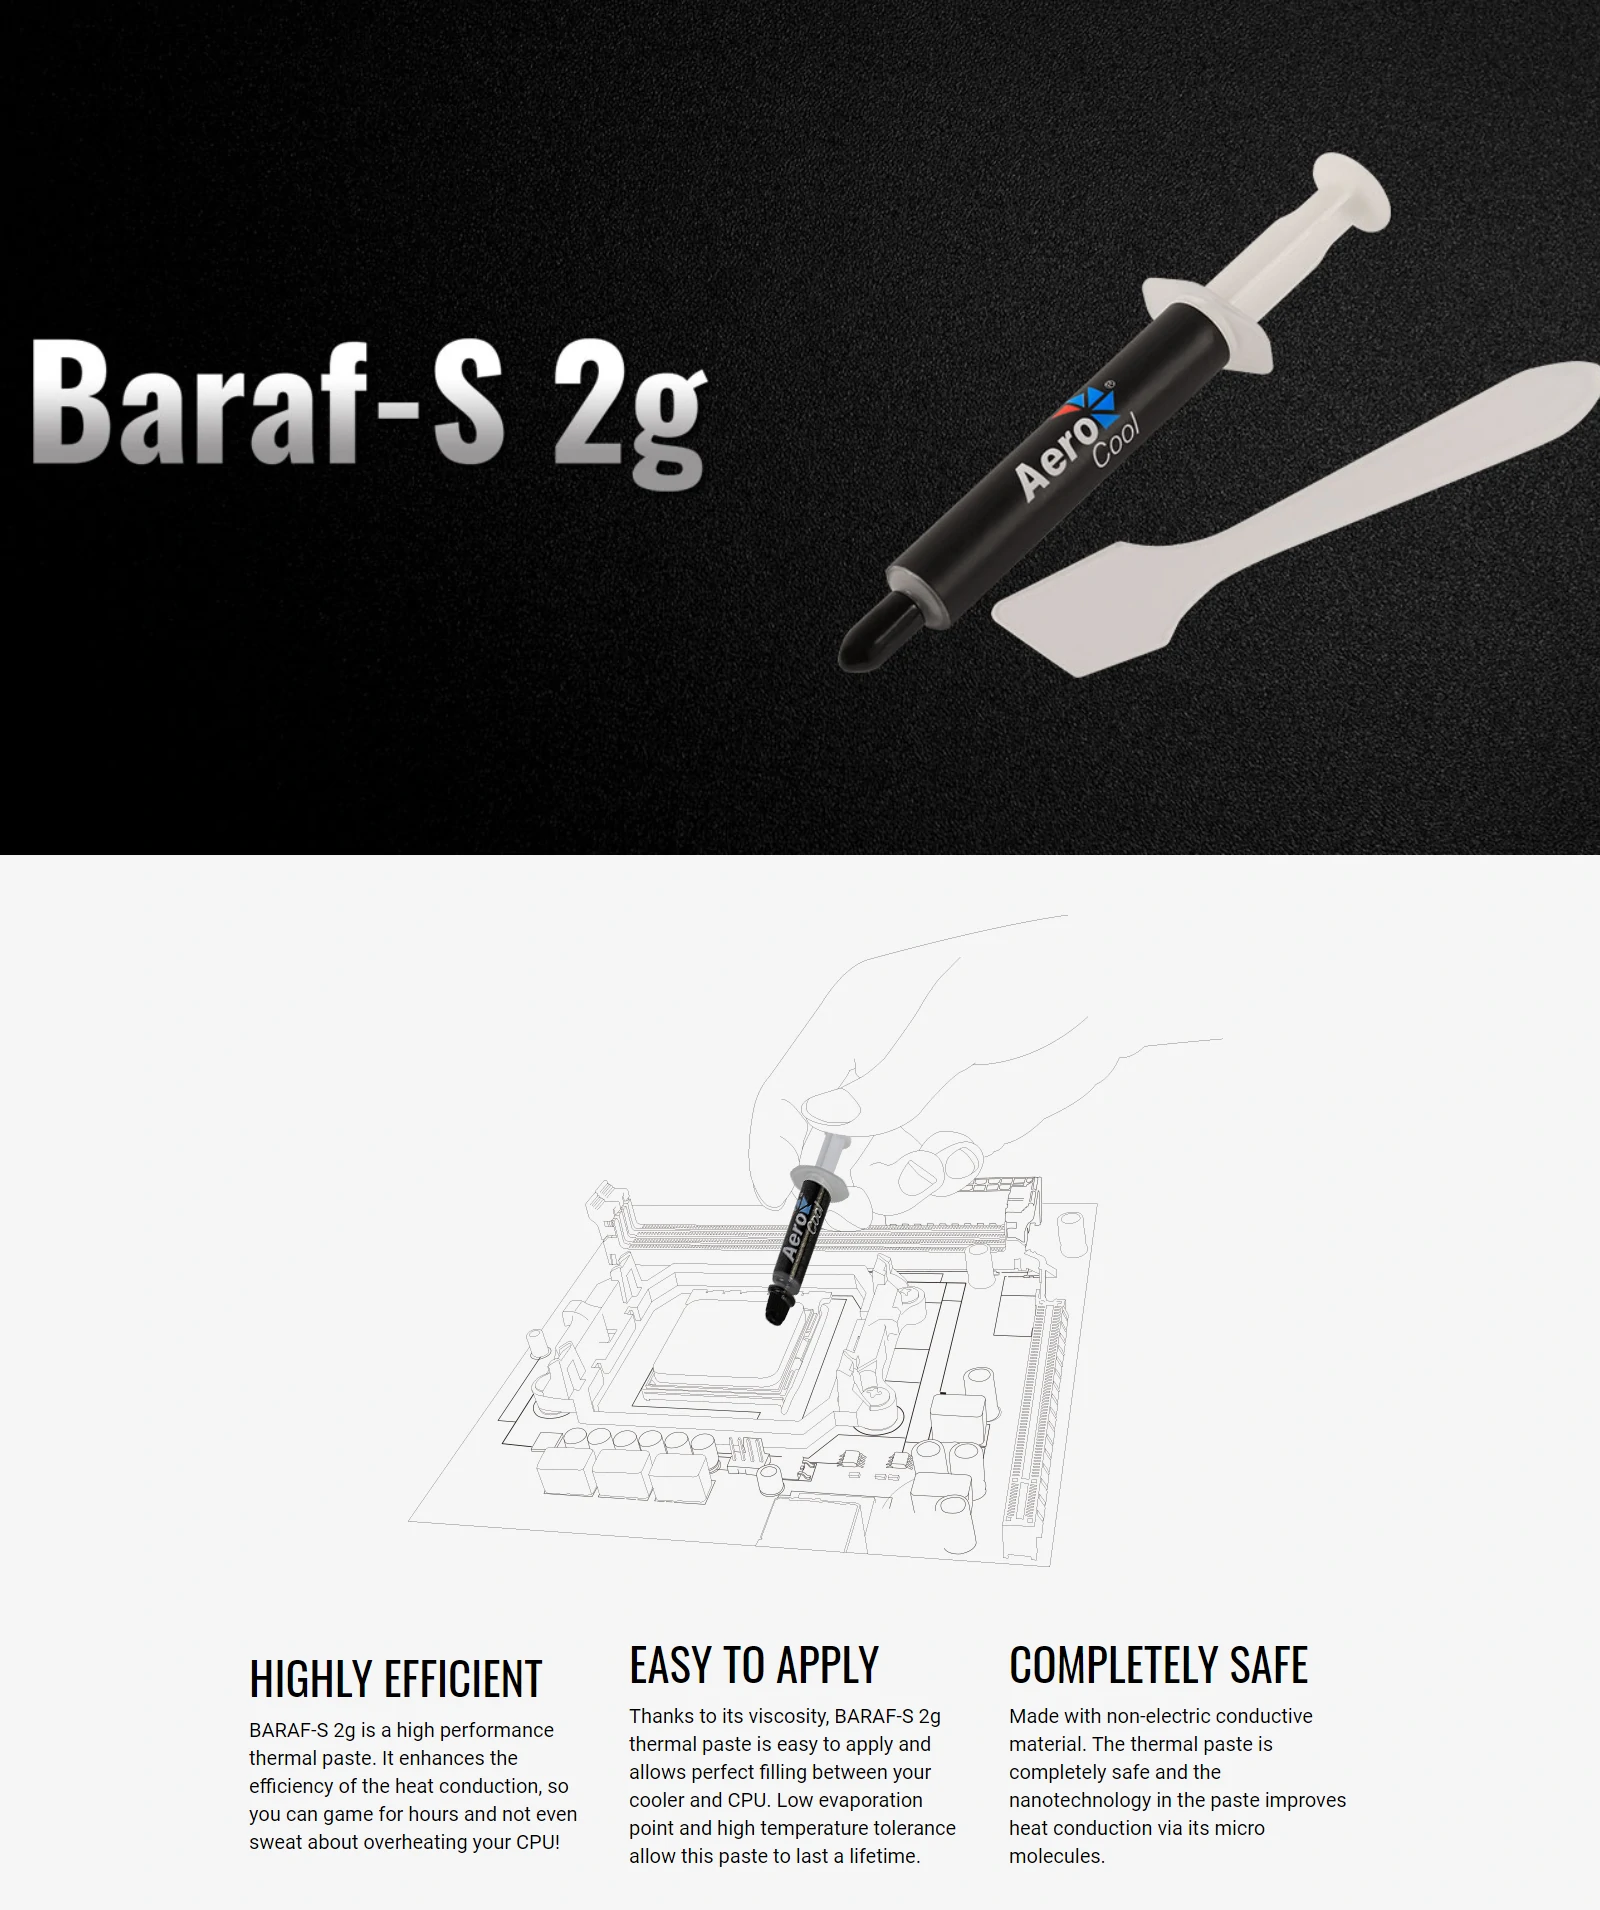 Overview - Aerocool - Baraf-S 2g Thermal Paste